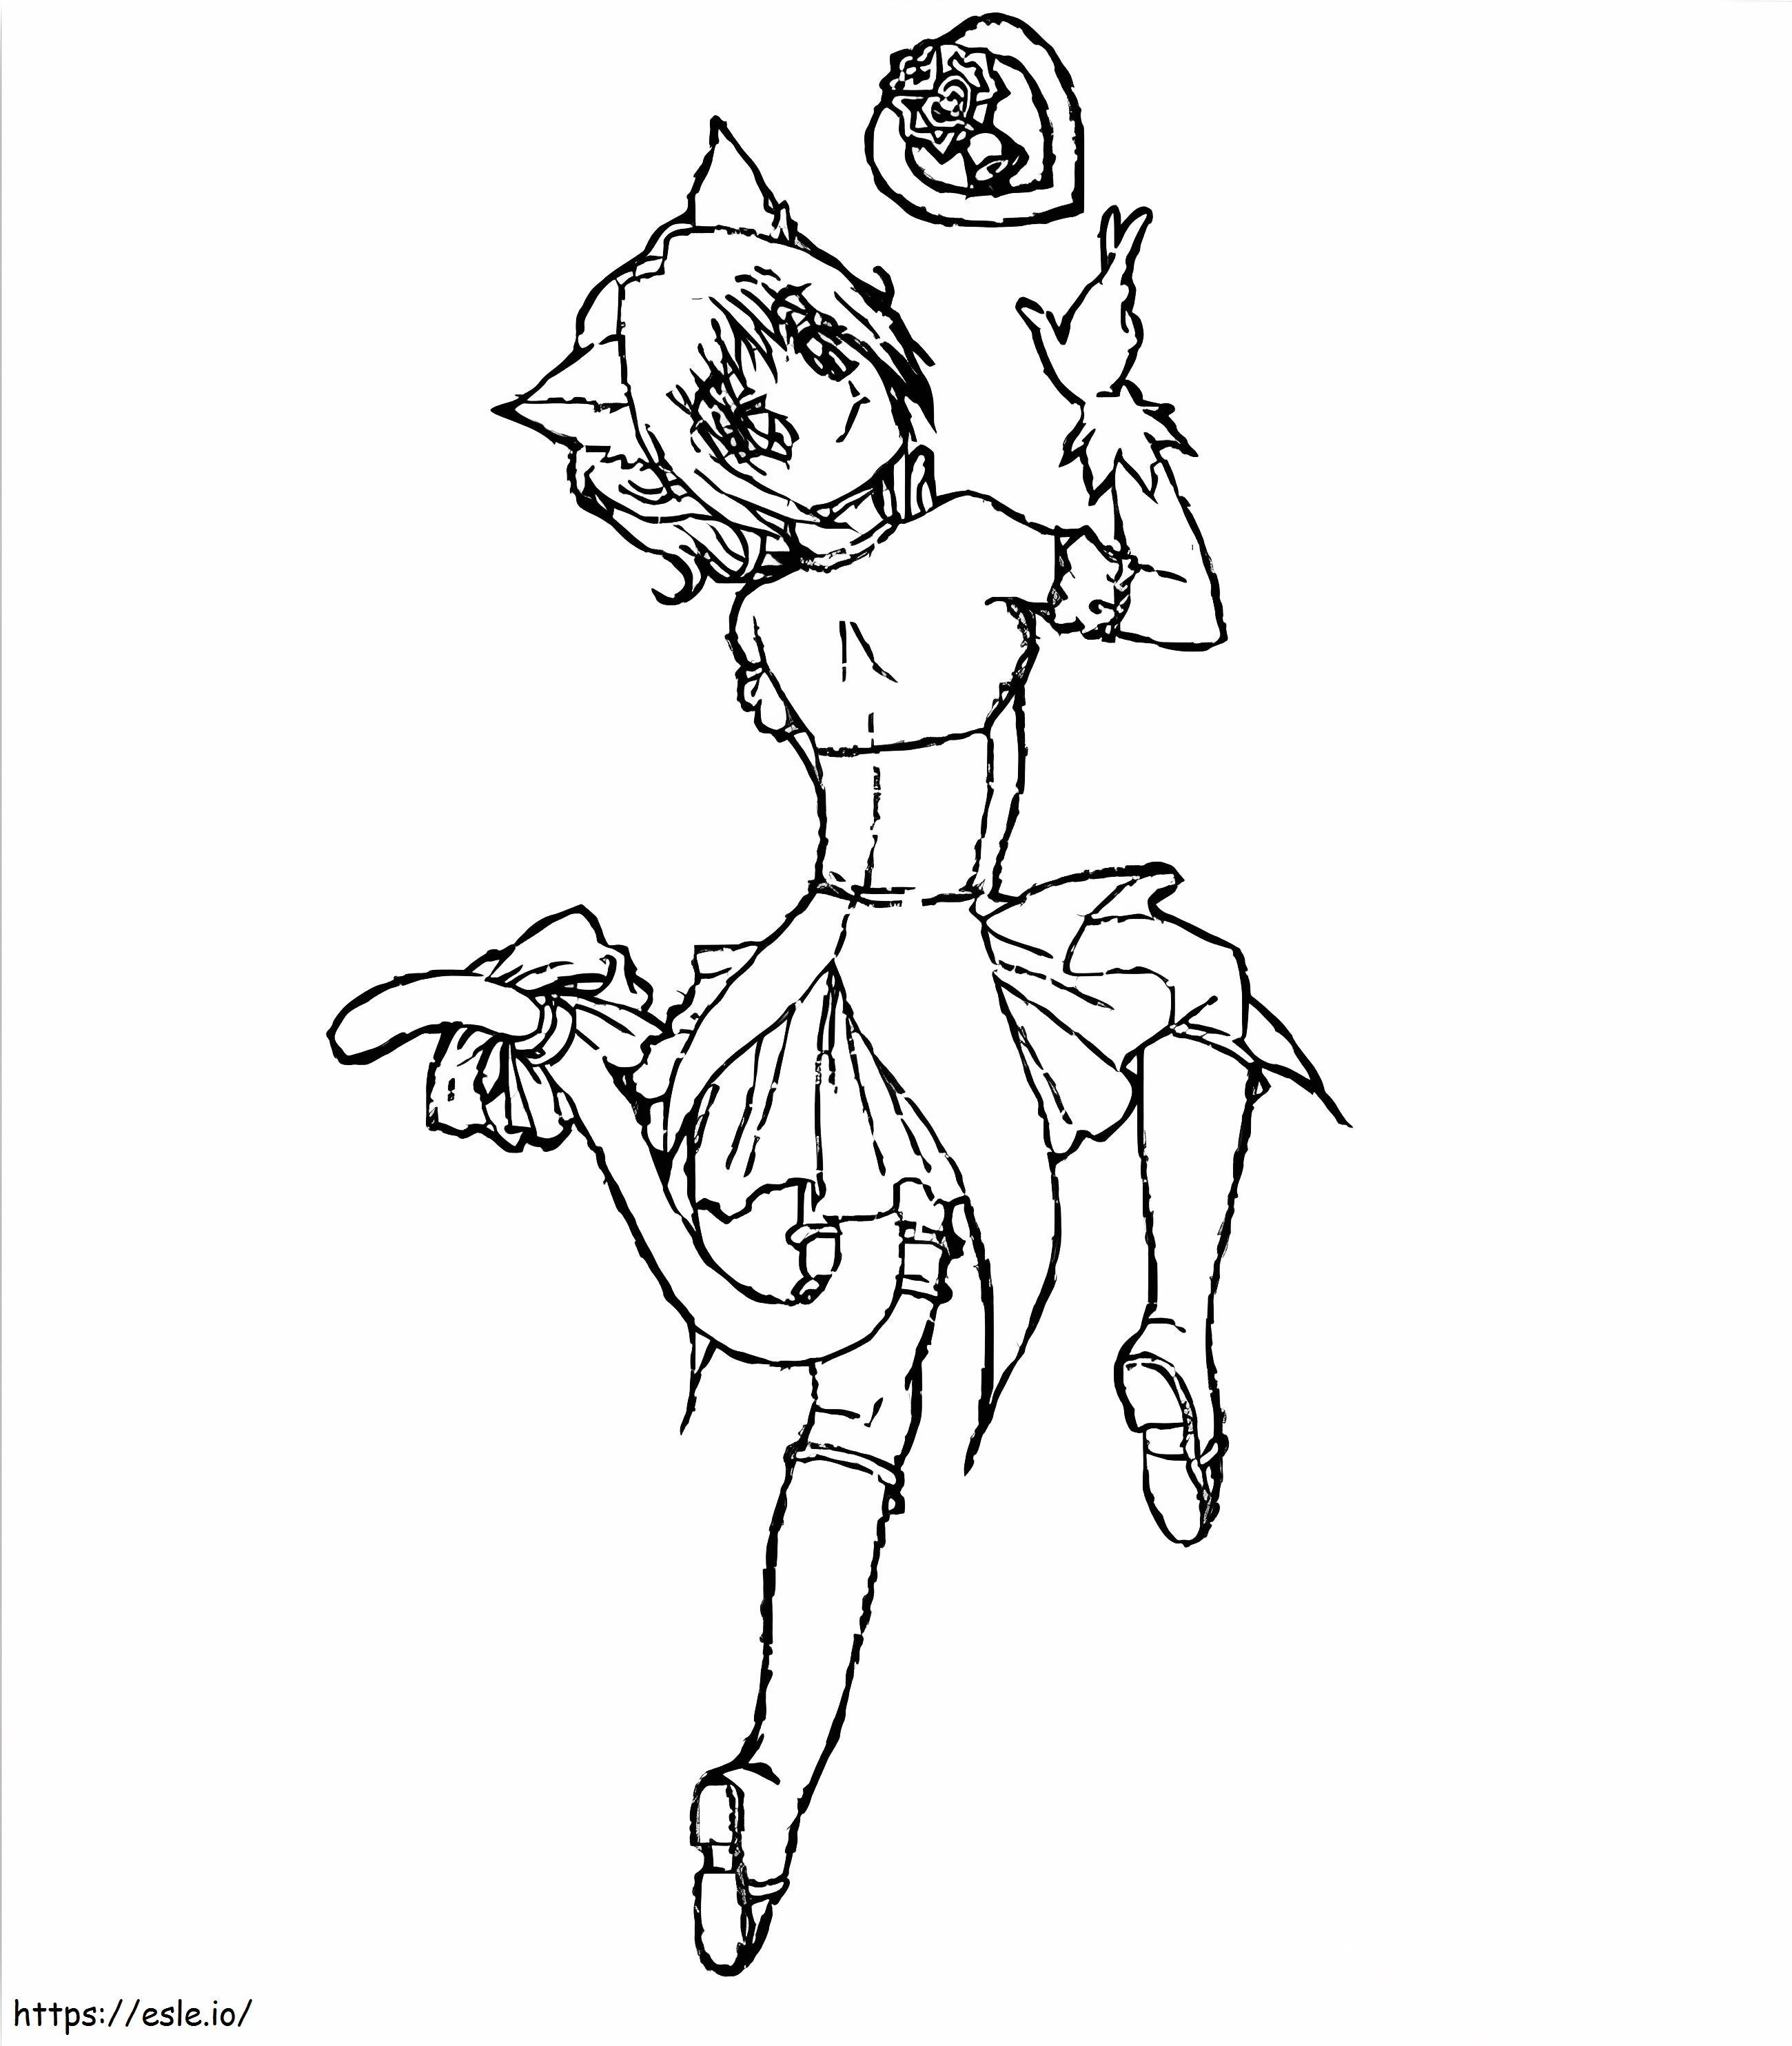 Lovely Tokyo Mew Mew coloring page